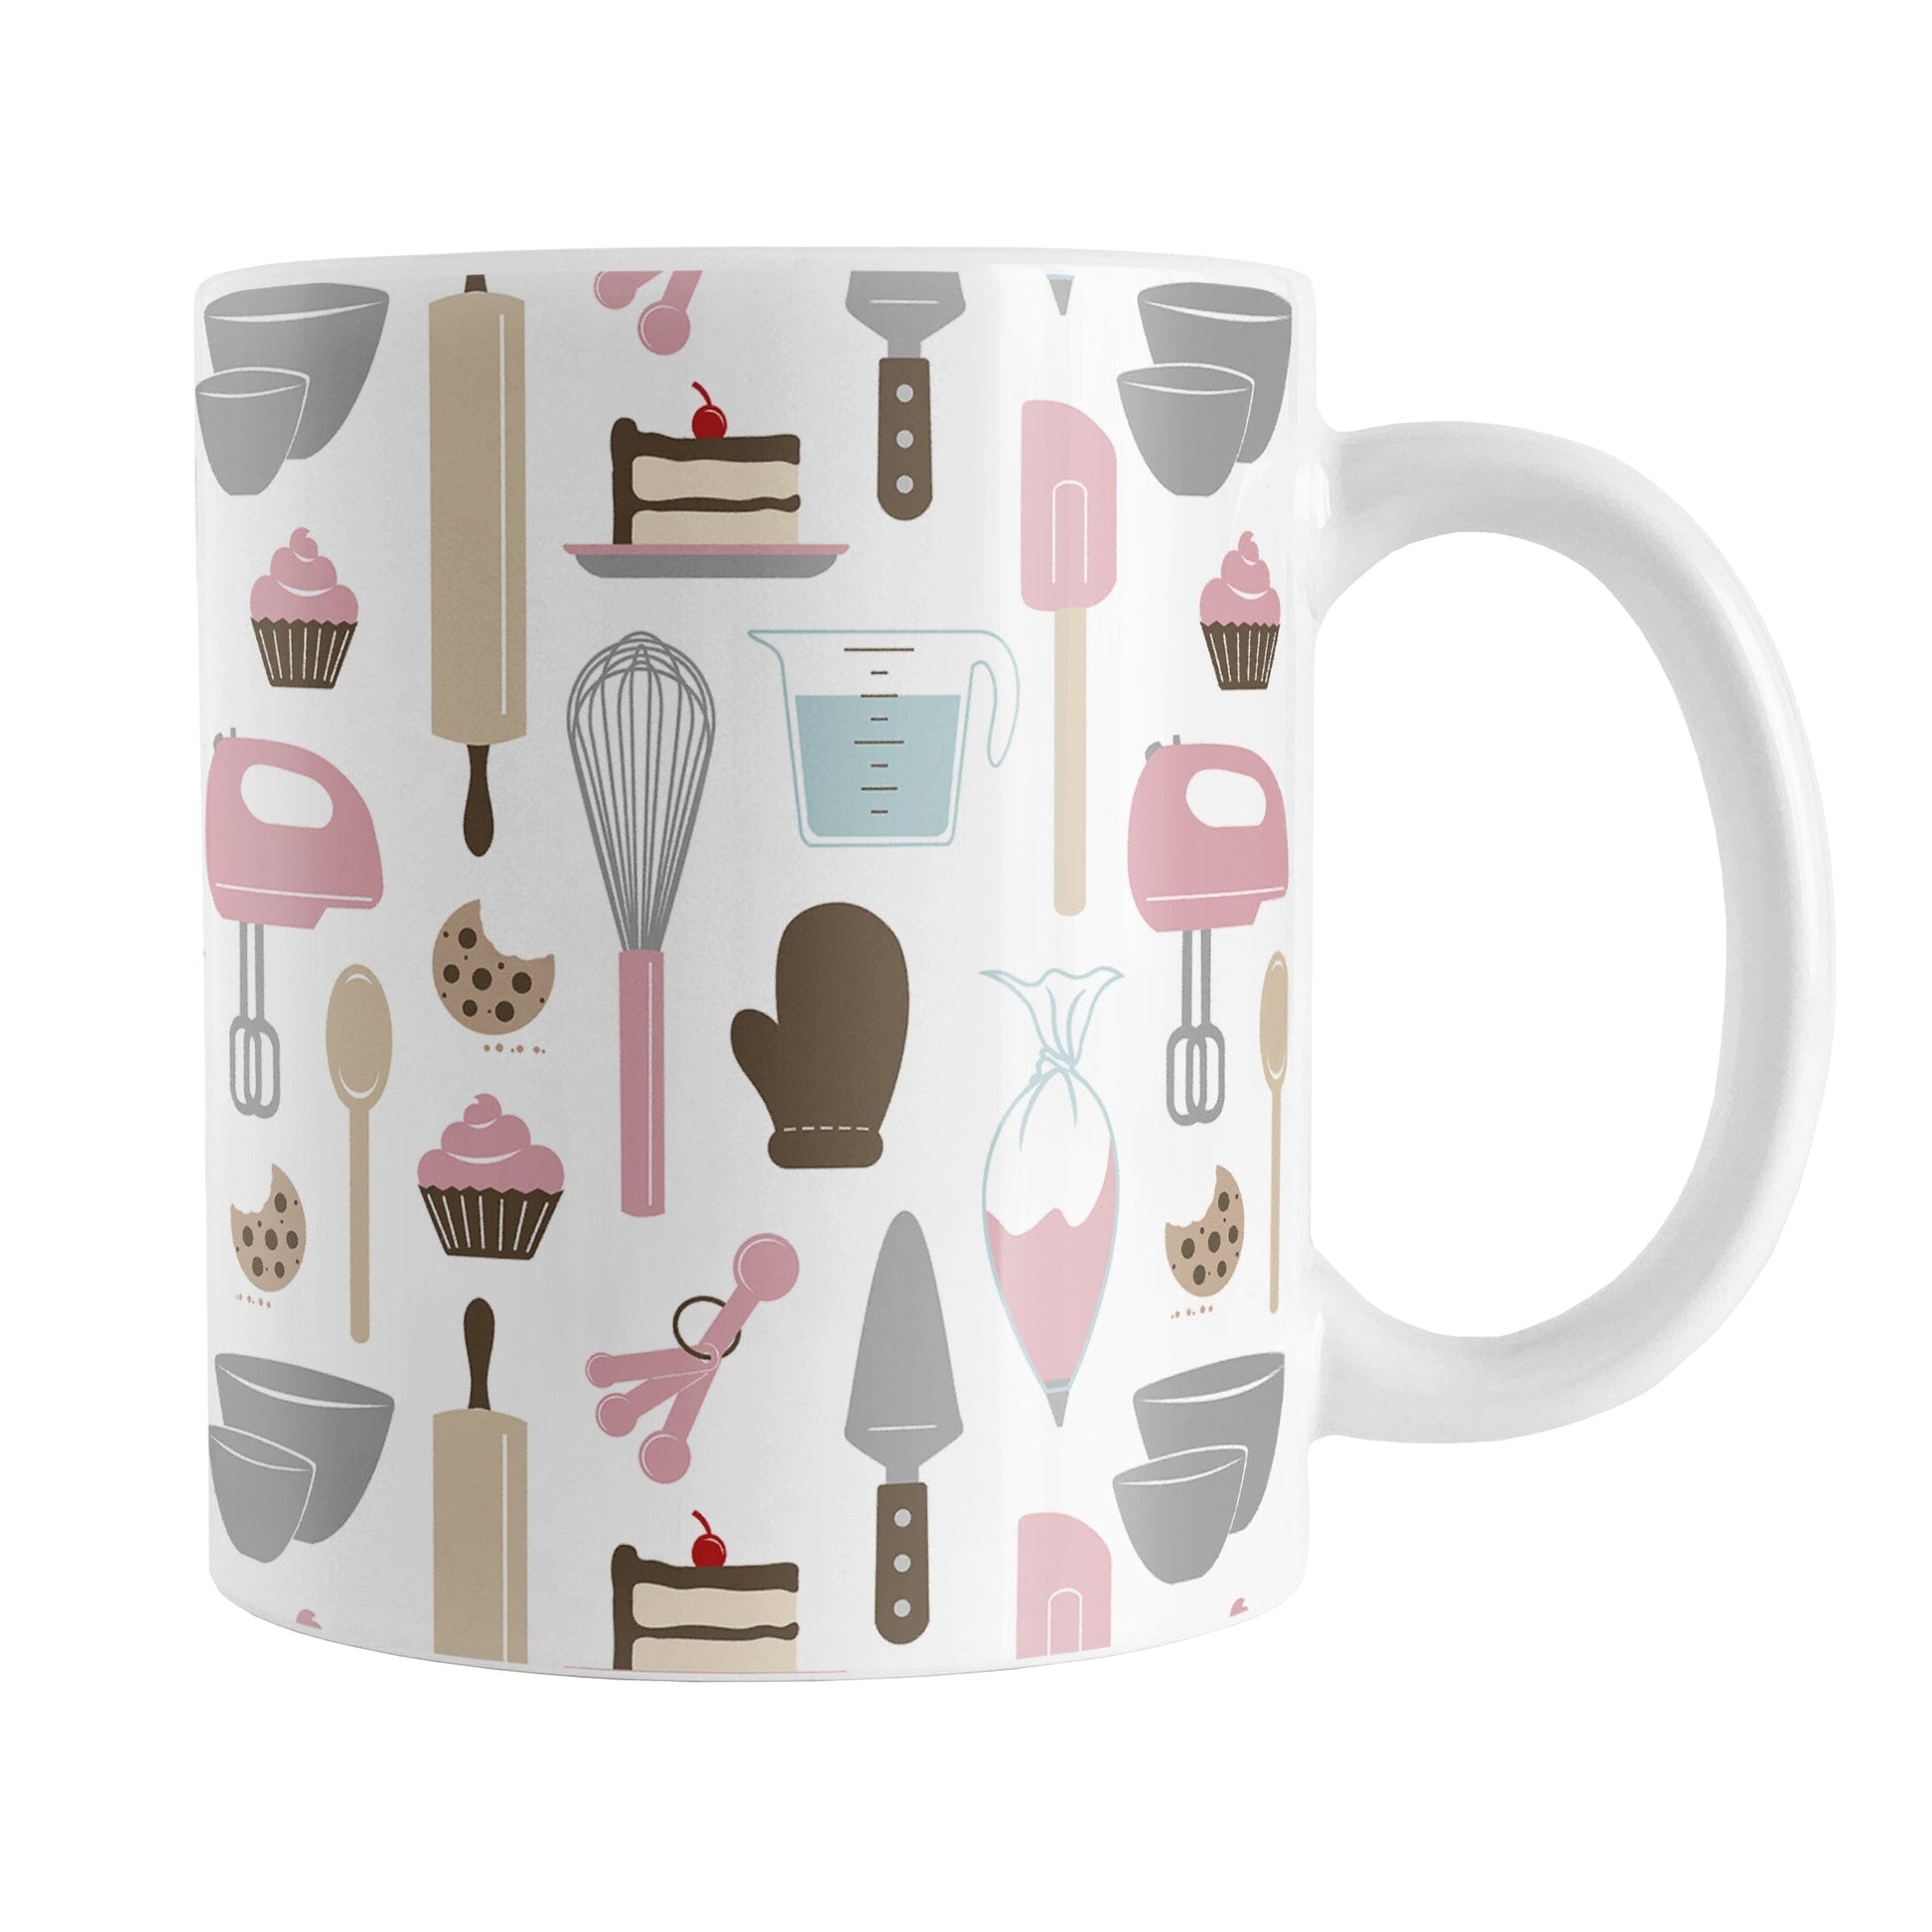 Pink Baking Pattern Mug (11oz) at Amy's Coffee Mugs. A ceramic coffee mug designed with a pattern of baking tools like spatulas, whisks, mixers, bowls, and spoons, with cookies, cupcakes, and cake all in a pink, gray, brown, and beige color scheme that wraps around the mug. 